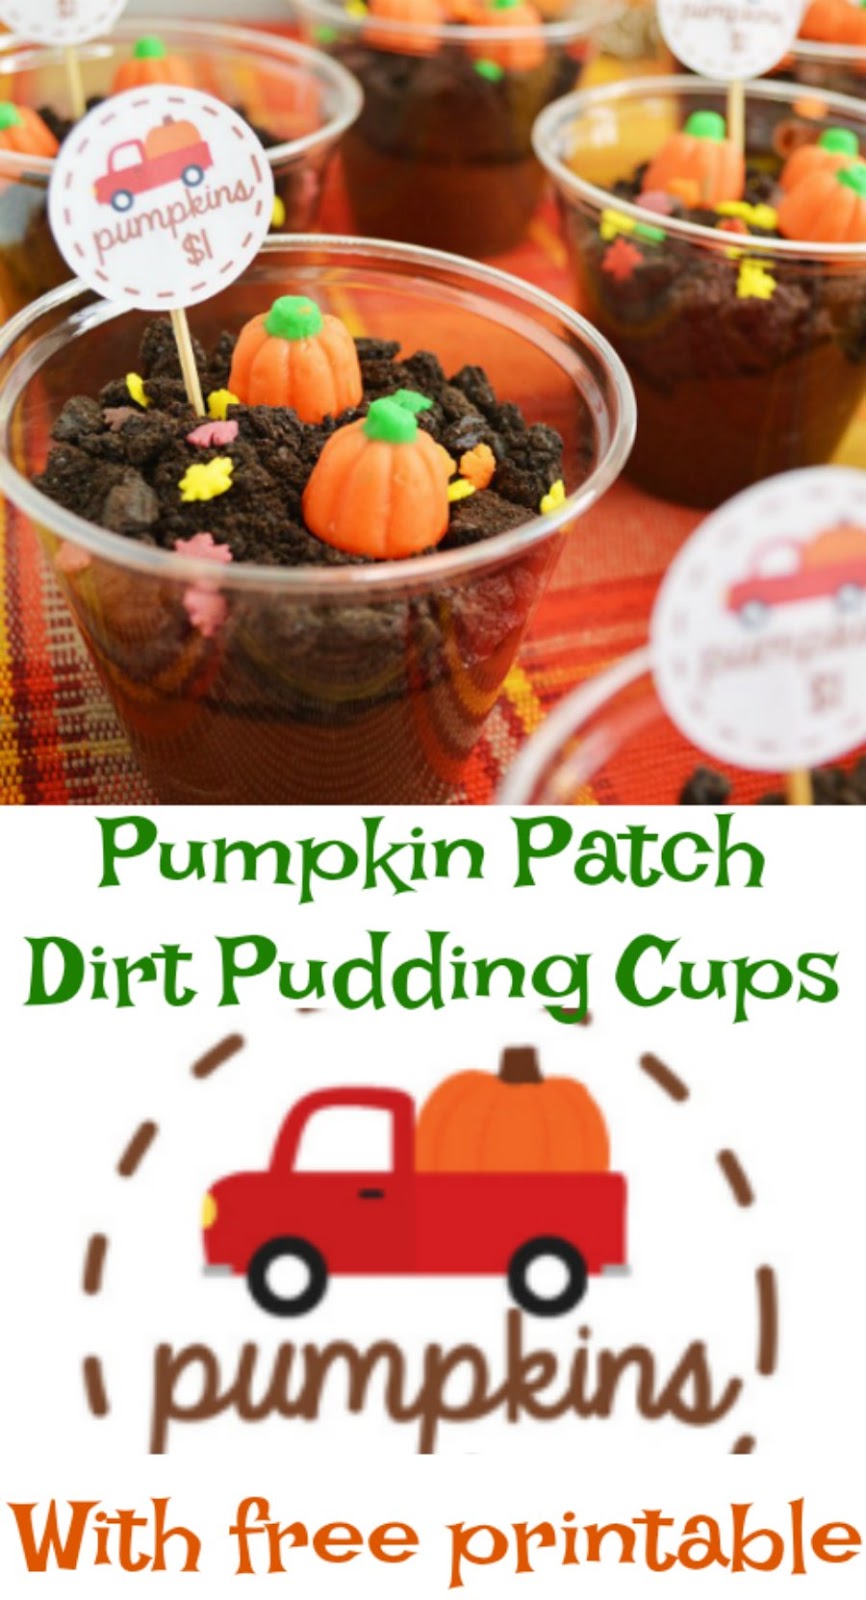 These fun little dirt pudding cups are dressed up and ready for a trip to the pumpkin patch. The free pumpkin truck printable means you can have your own cute treats in no time!